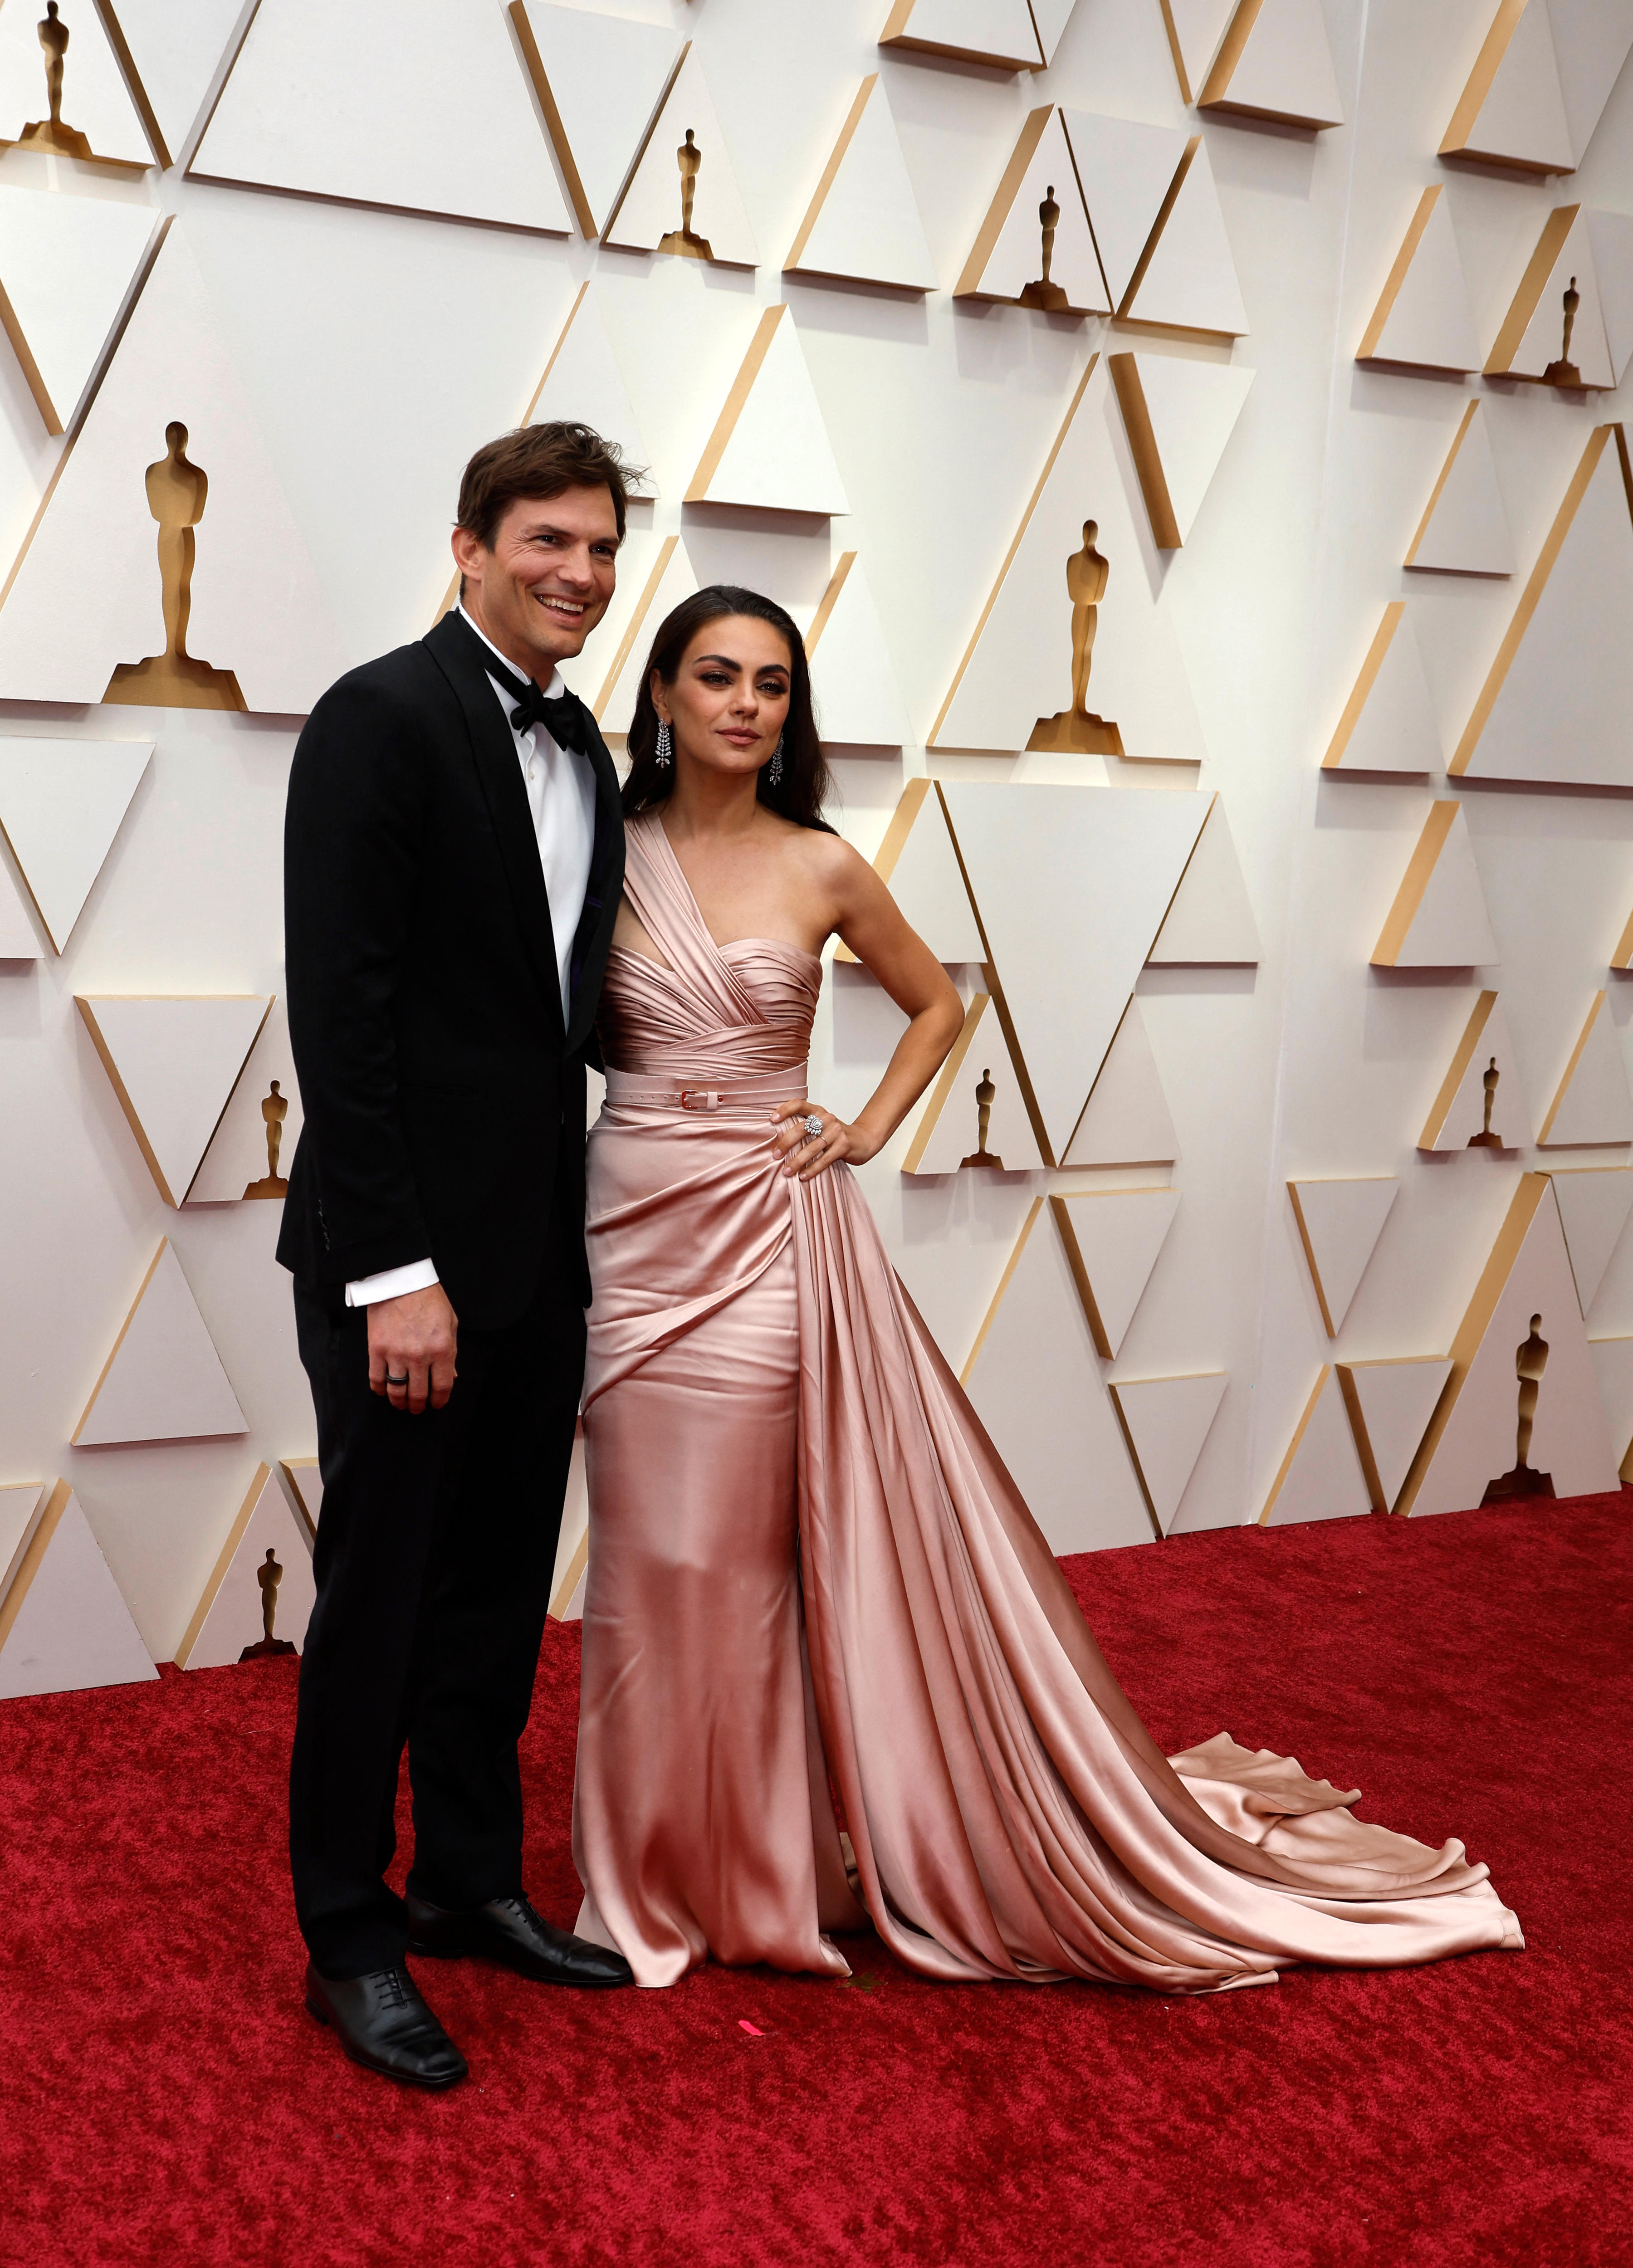 couple ashton kutcher and mila kunis stand arm in arm on the red carpet. kunis wears a dusty pink silk gown with a side train